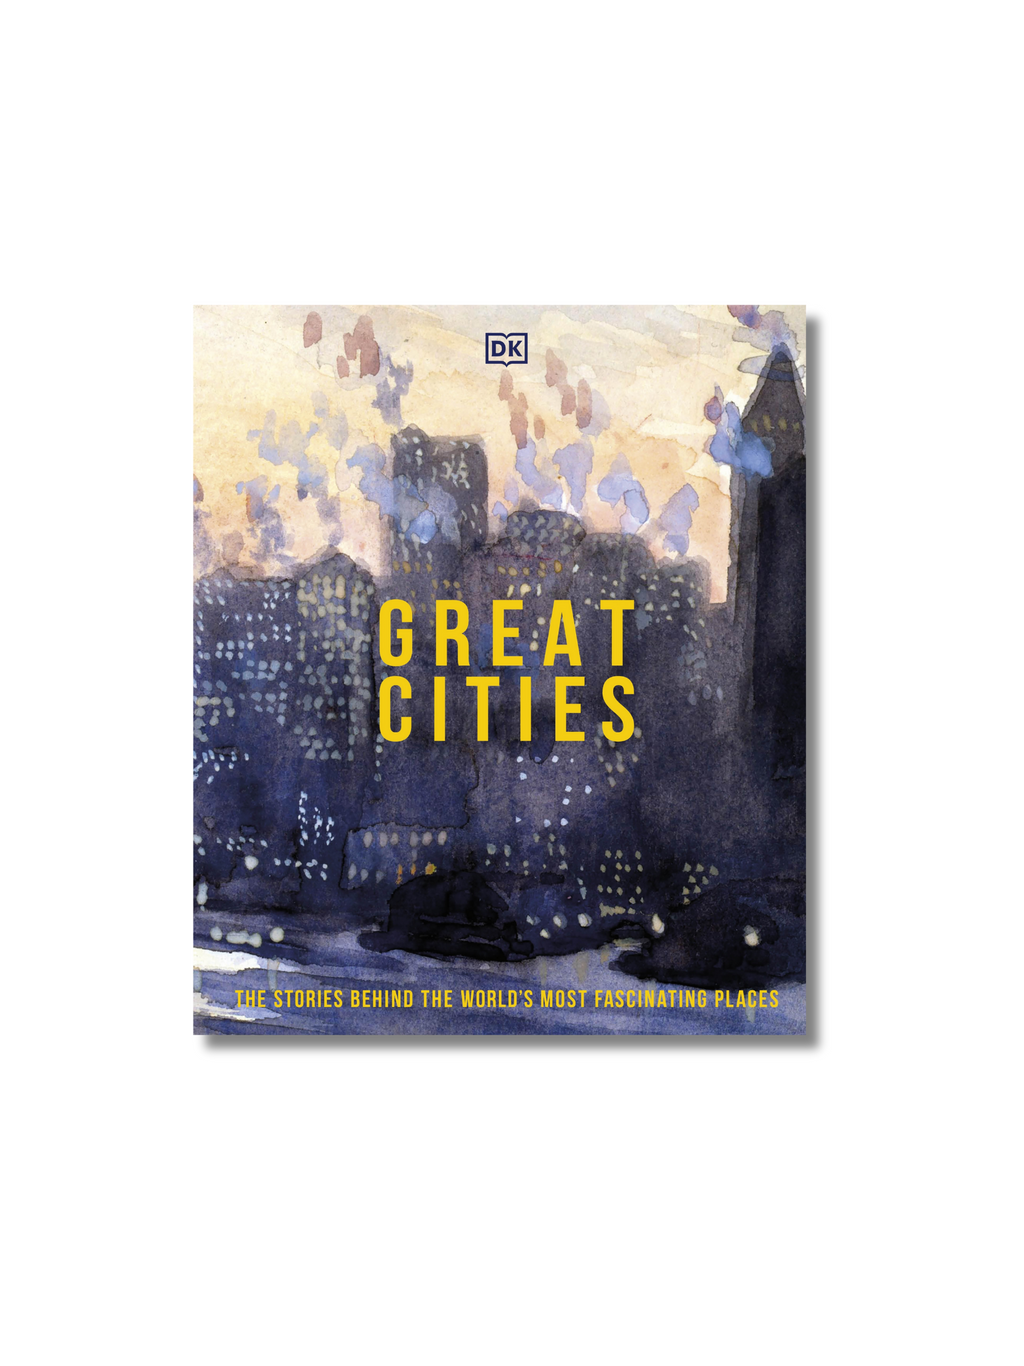 Great Cities: The Stories Behind the World’s most Fascinating Places